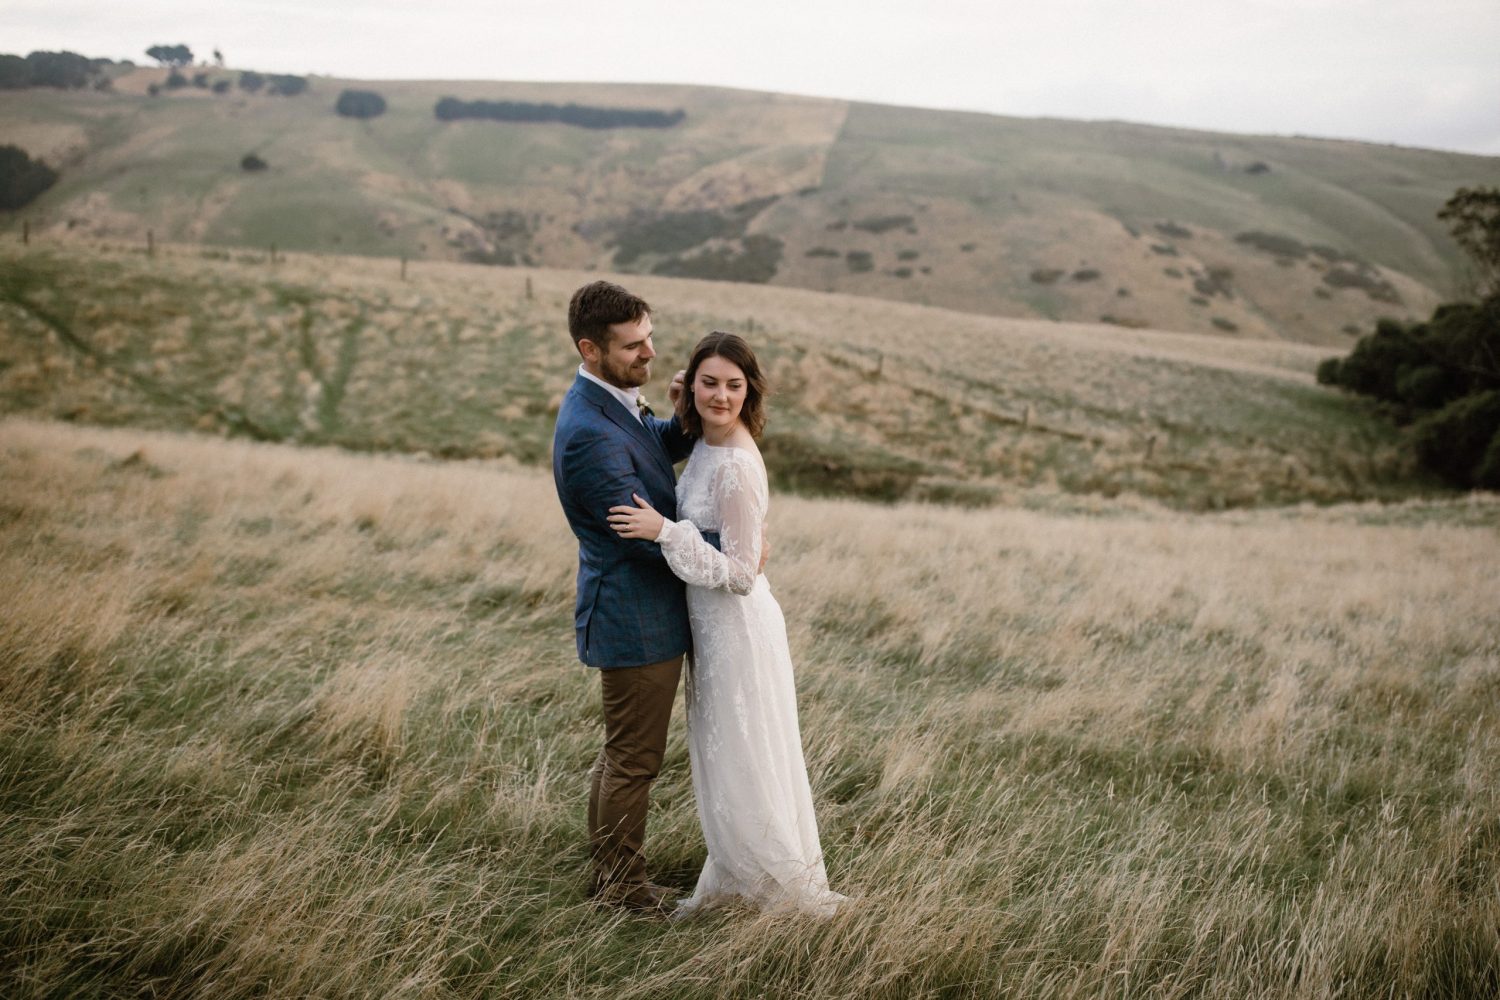 Elegant bride and groom embracing each other in a field of grass, bride wears a vintage lace gown Dunedin weddings - Ana Galloway Photography